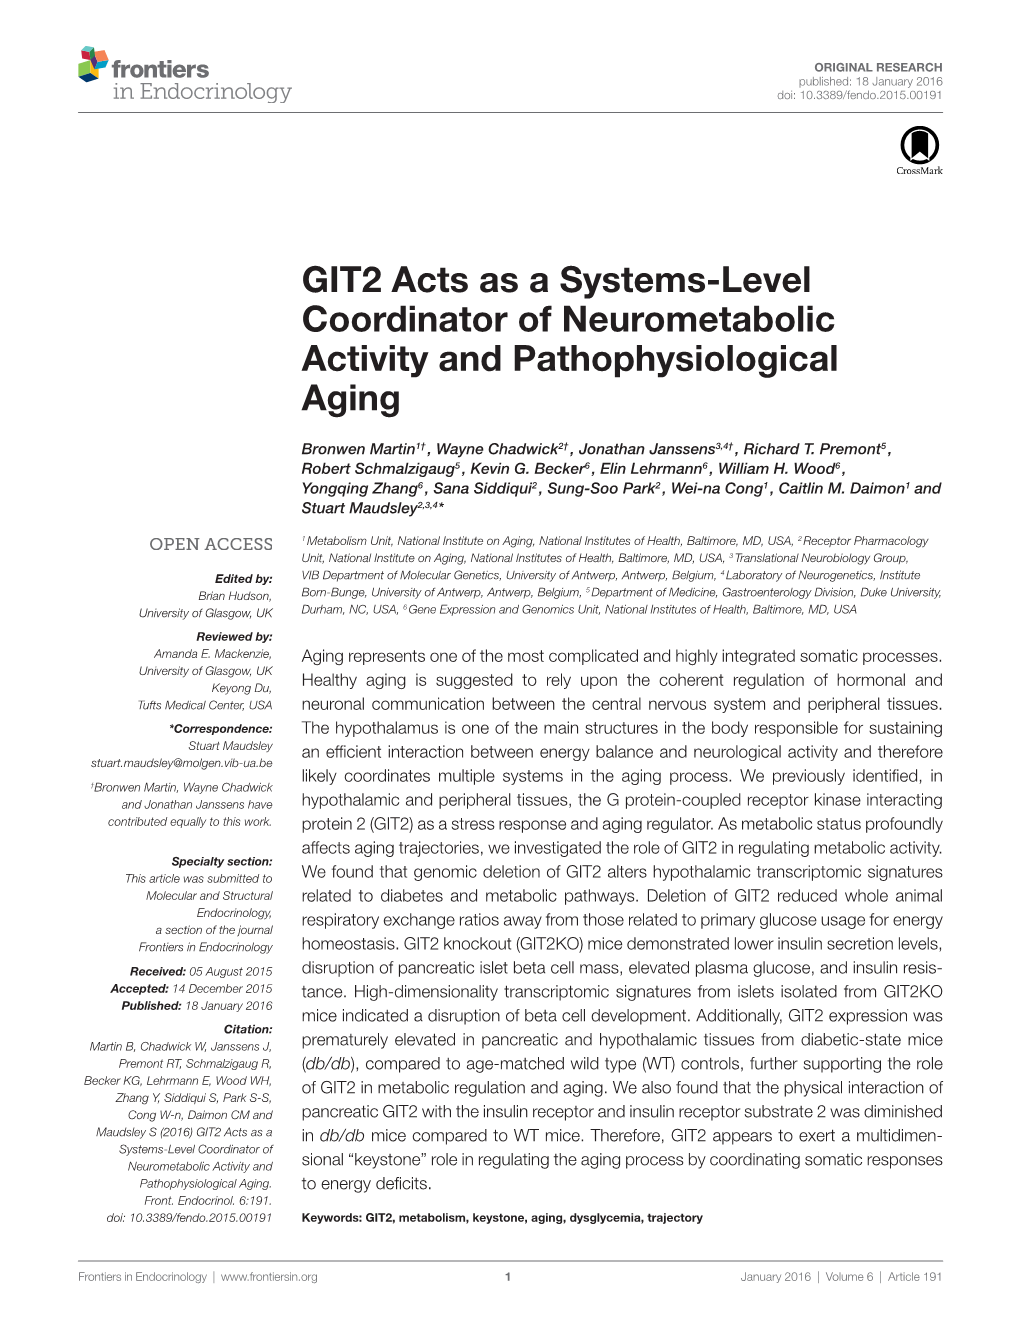 Git2 Acts As a Systems-Level Coordinator of Neurometabolic Activity and Pathophysiological Aging